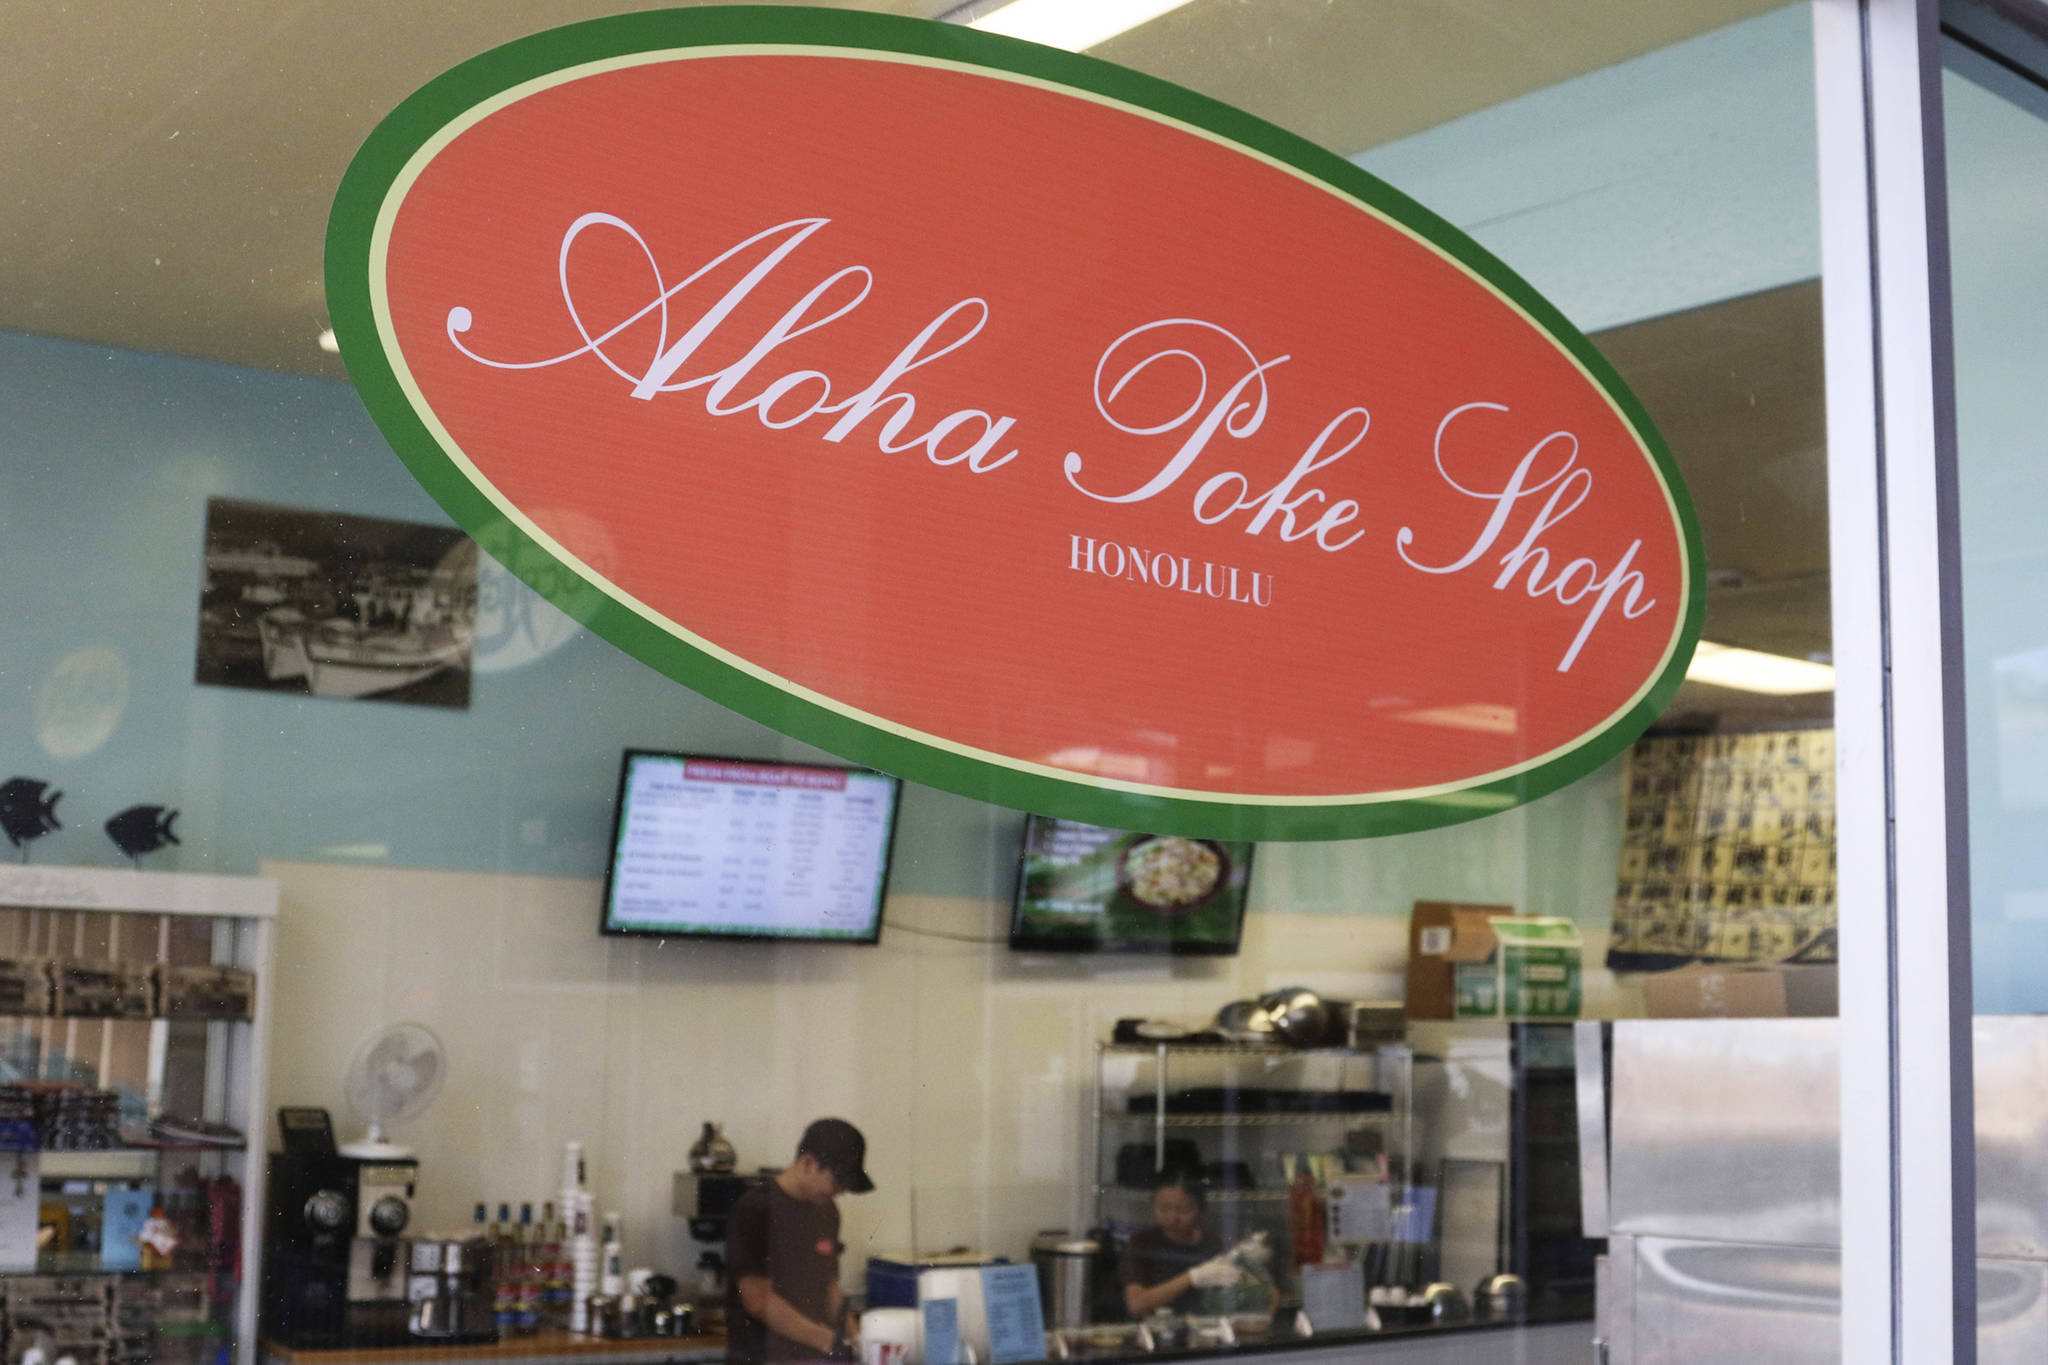 This April 16, 2019 photo shows Aloha Poke Shop, a store in Honolulu that received a letter from Chicago-based Aloha Poke Co. saying the Illinois company had trademarked “Aloha Poke” and the Hawaii company would need to change its name. Hawaii lawmakers are considering adopting a resolution calling for the creation of legal protections for Native Hawaiian cultural intellectual property. (Audrey McAvoy | Associated Press)